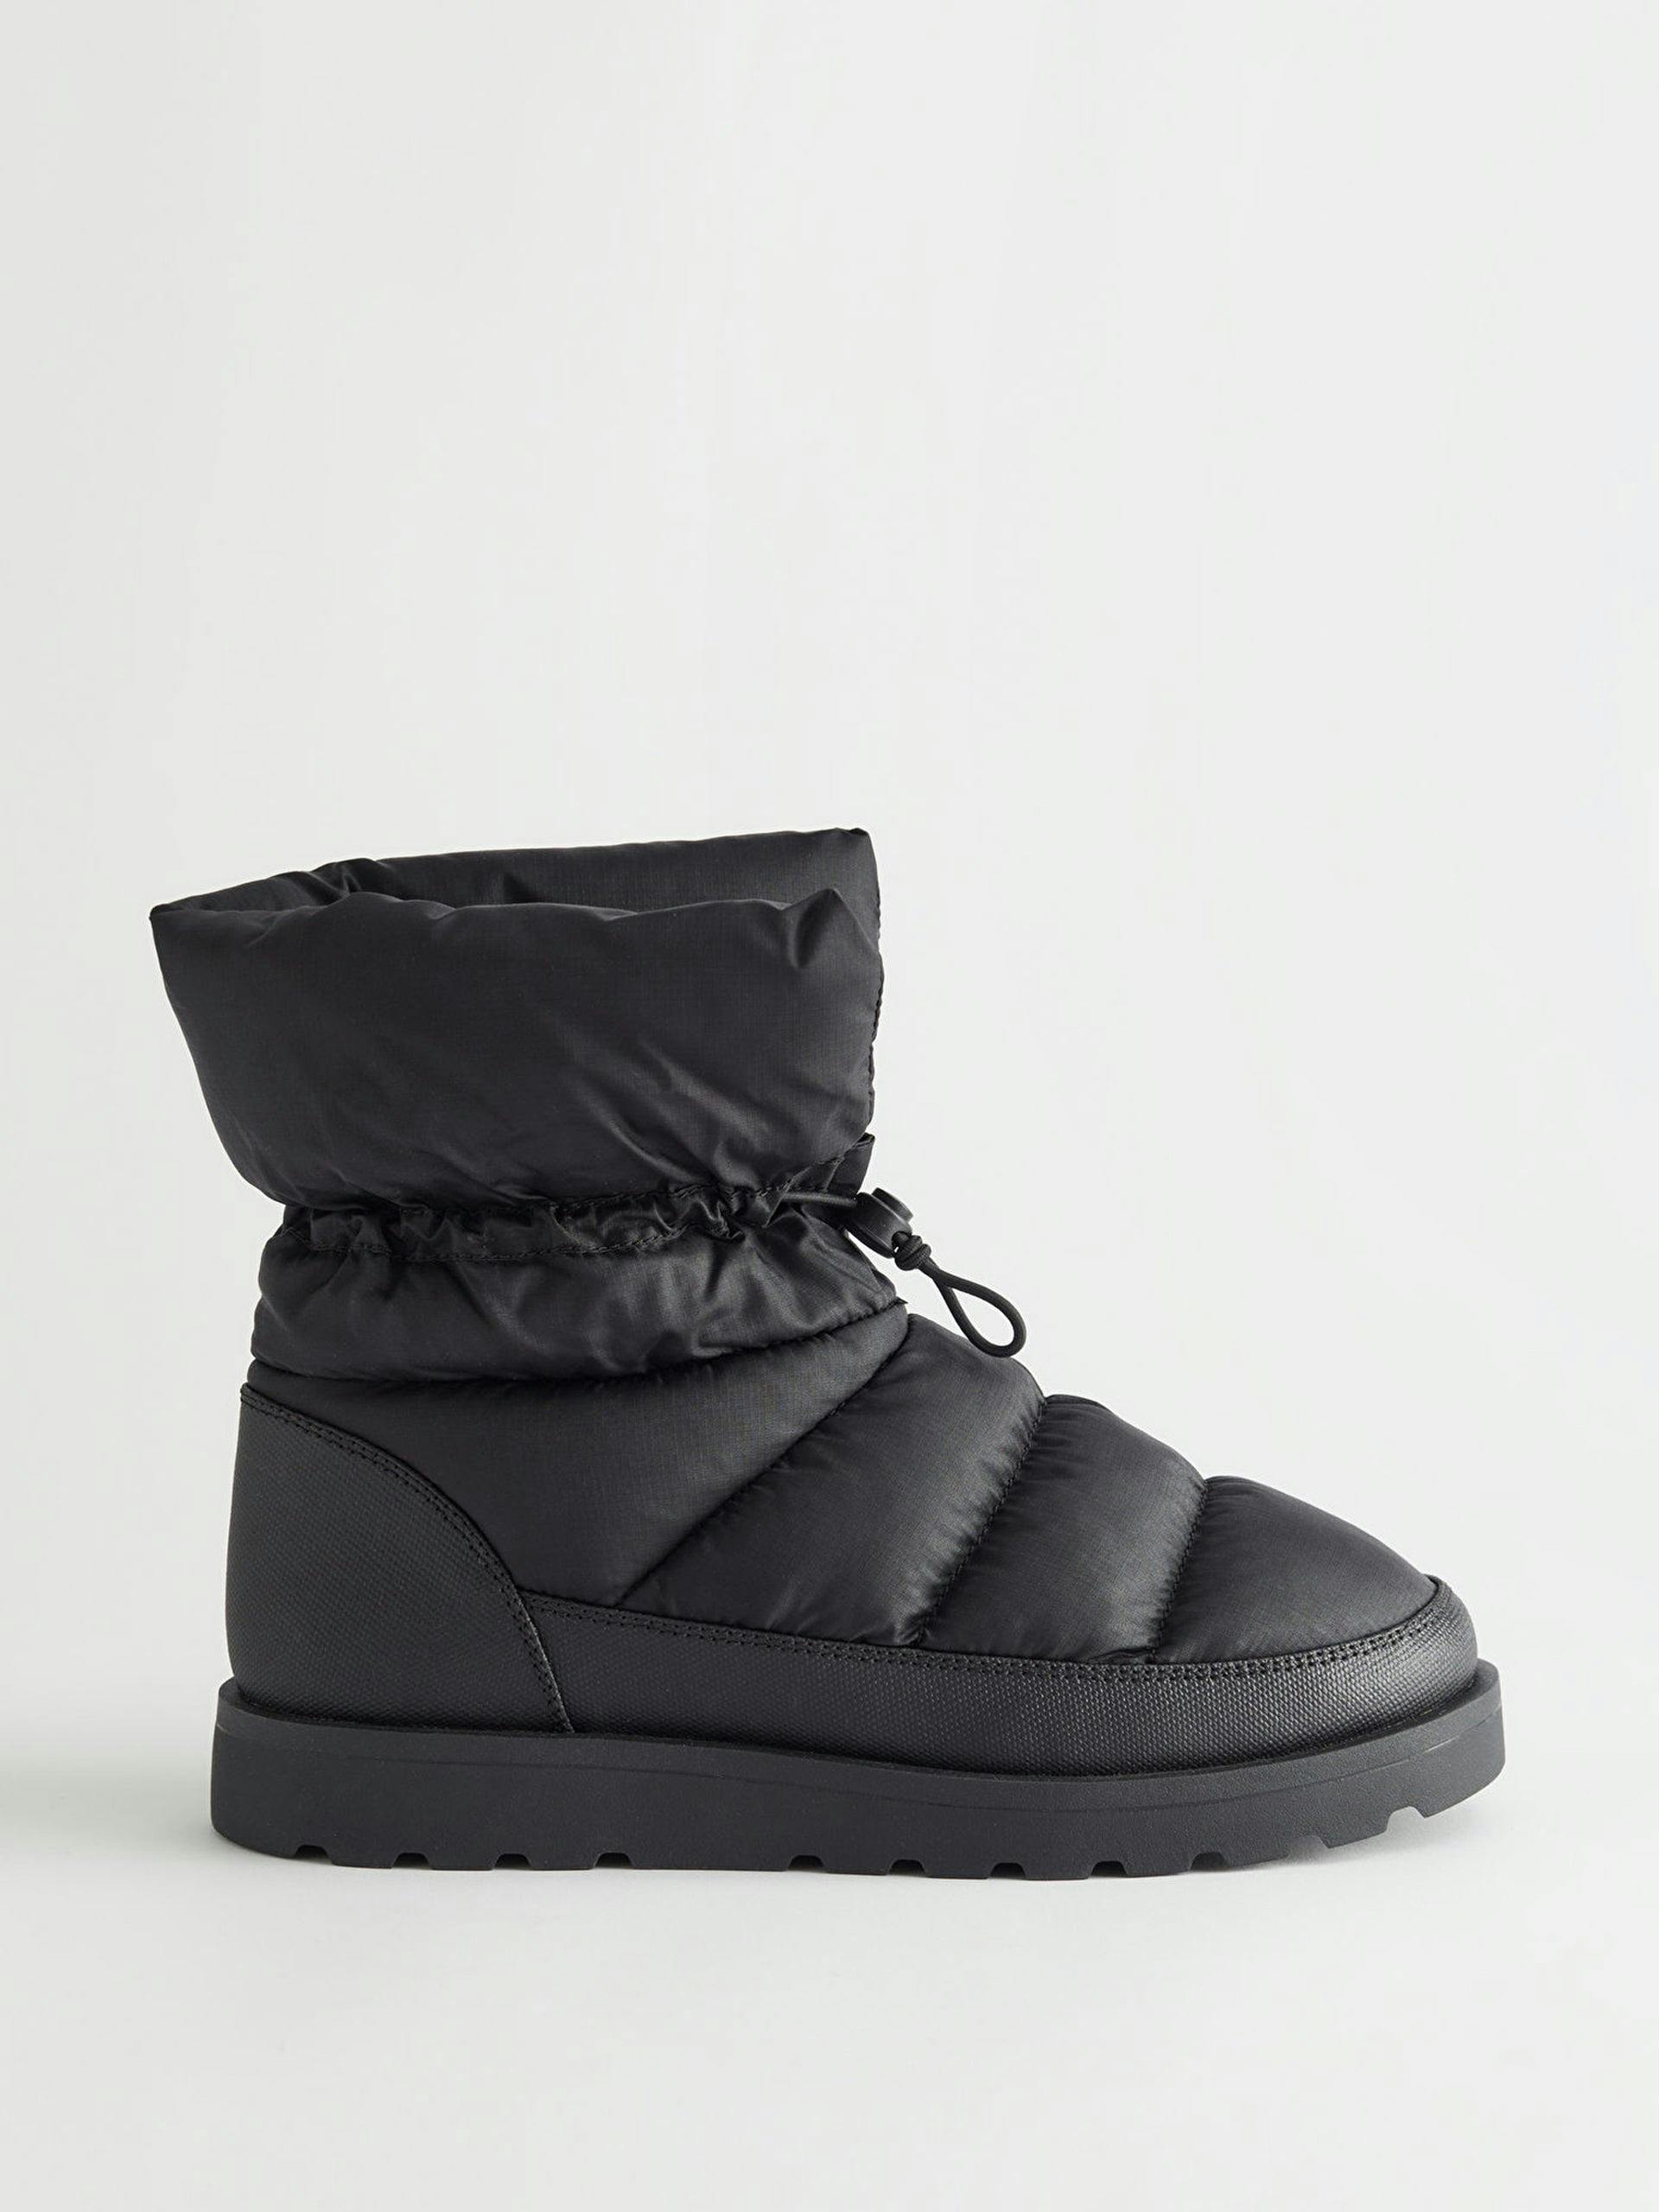 Black padded winter boots